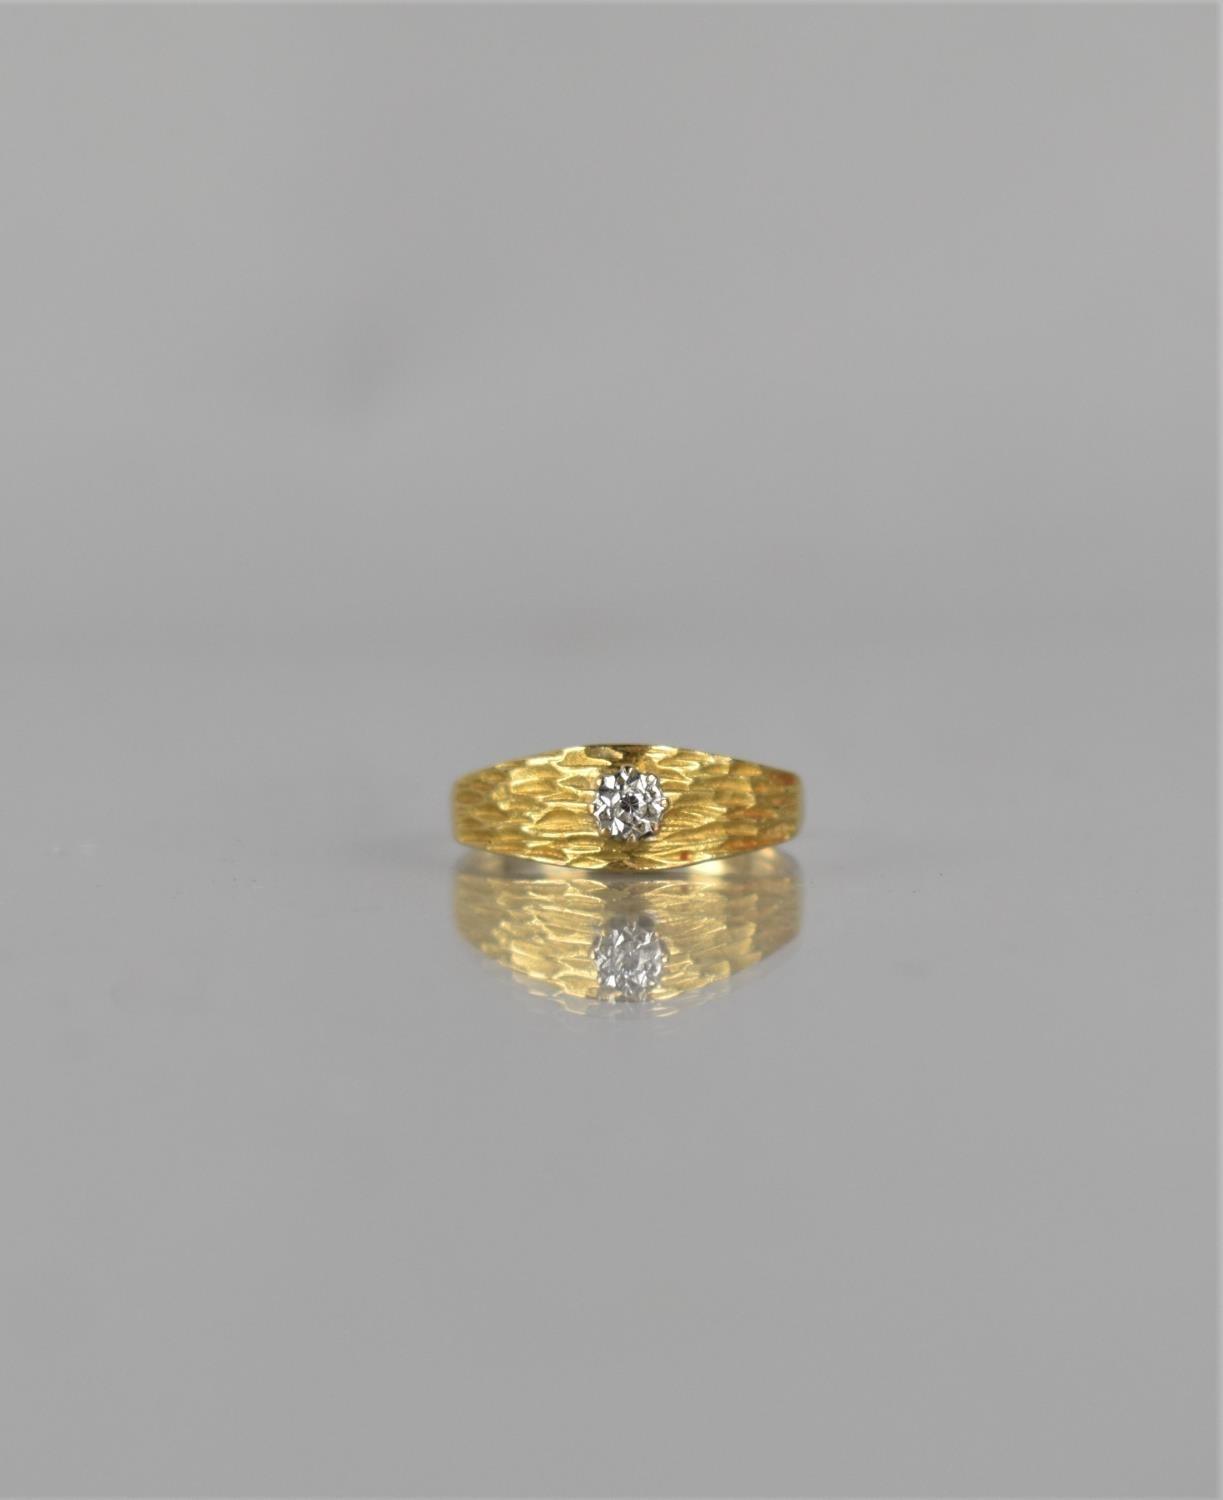 An 18ct Gold and Platinum Diamond Solitaire Ring, Centre Round Cut Stone Measuring Approx 2mm